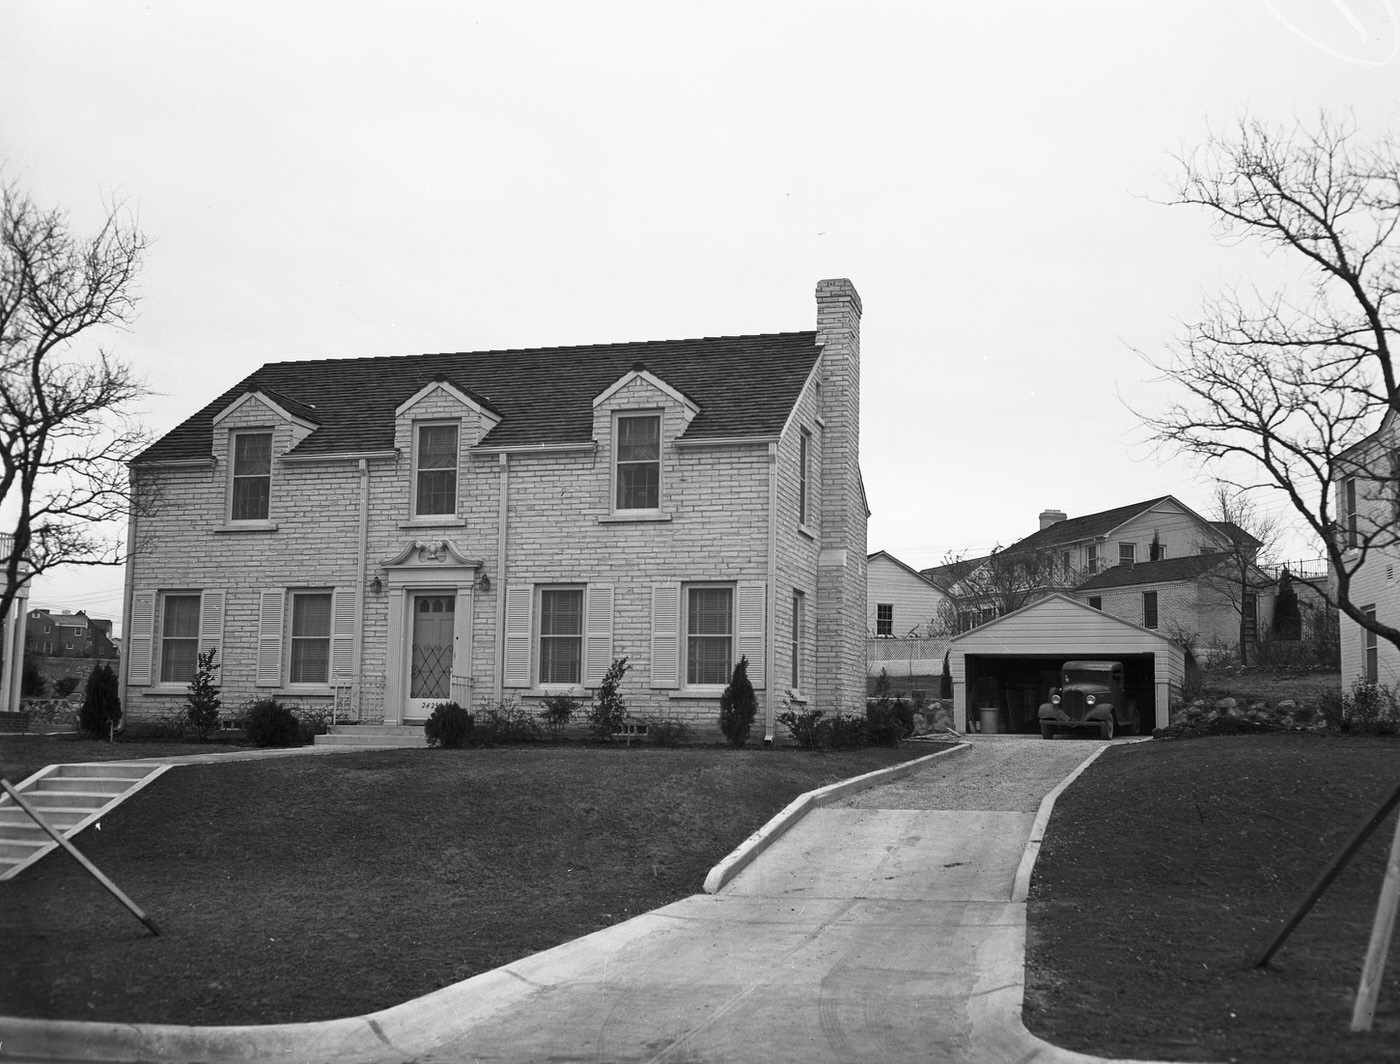 The new home of Doctor and Mrs. M. J. Bisco is at 2425 Colonial Parkway, Fort Worth, Texas, 1942